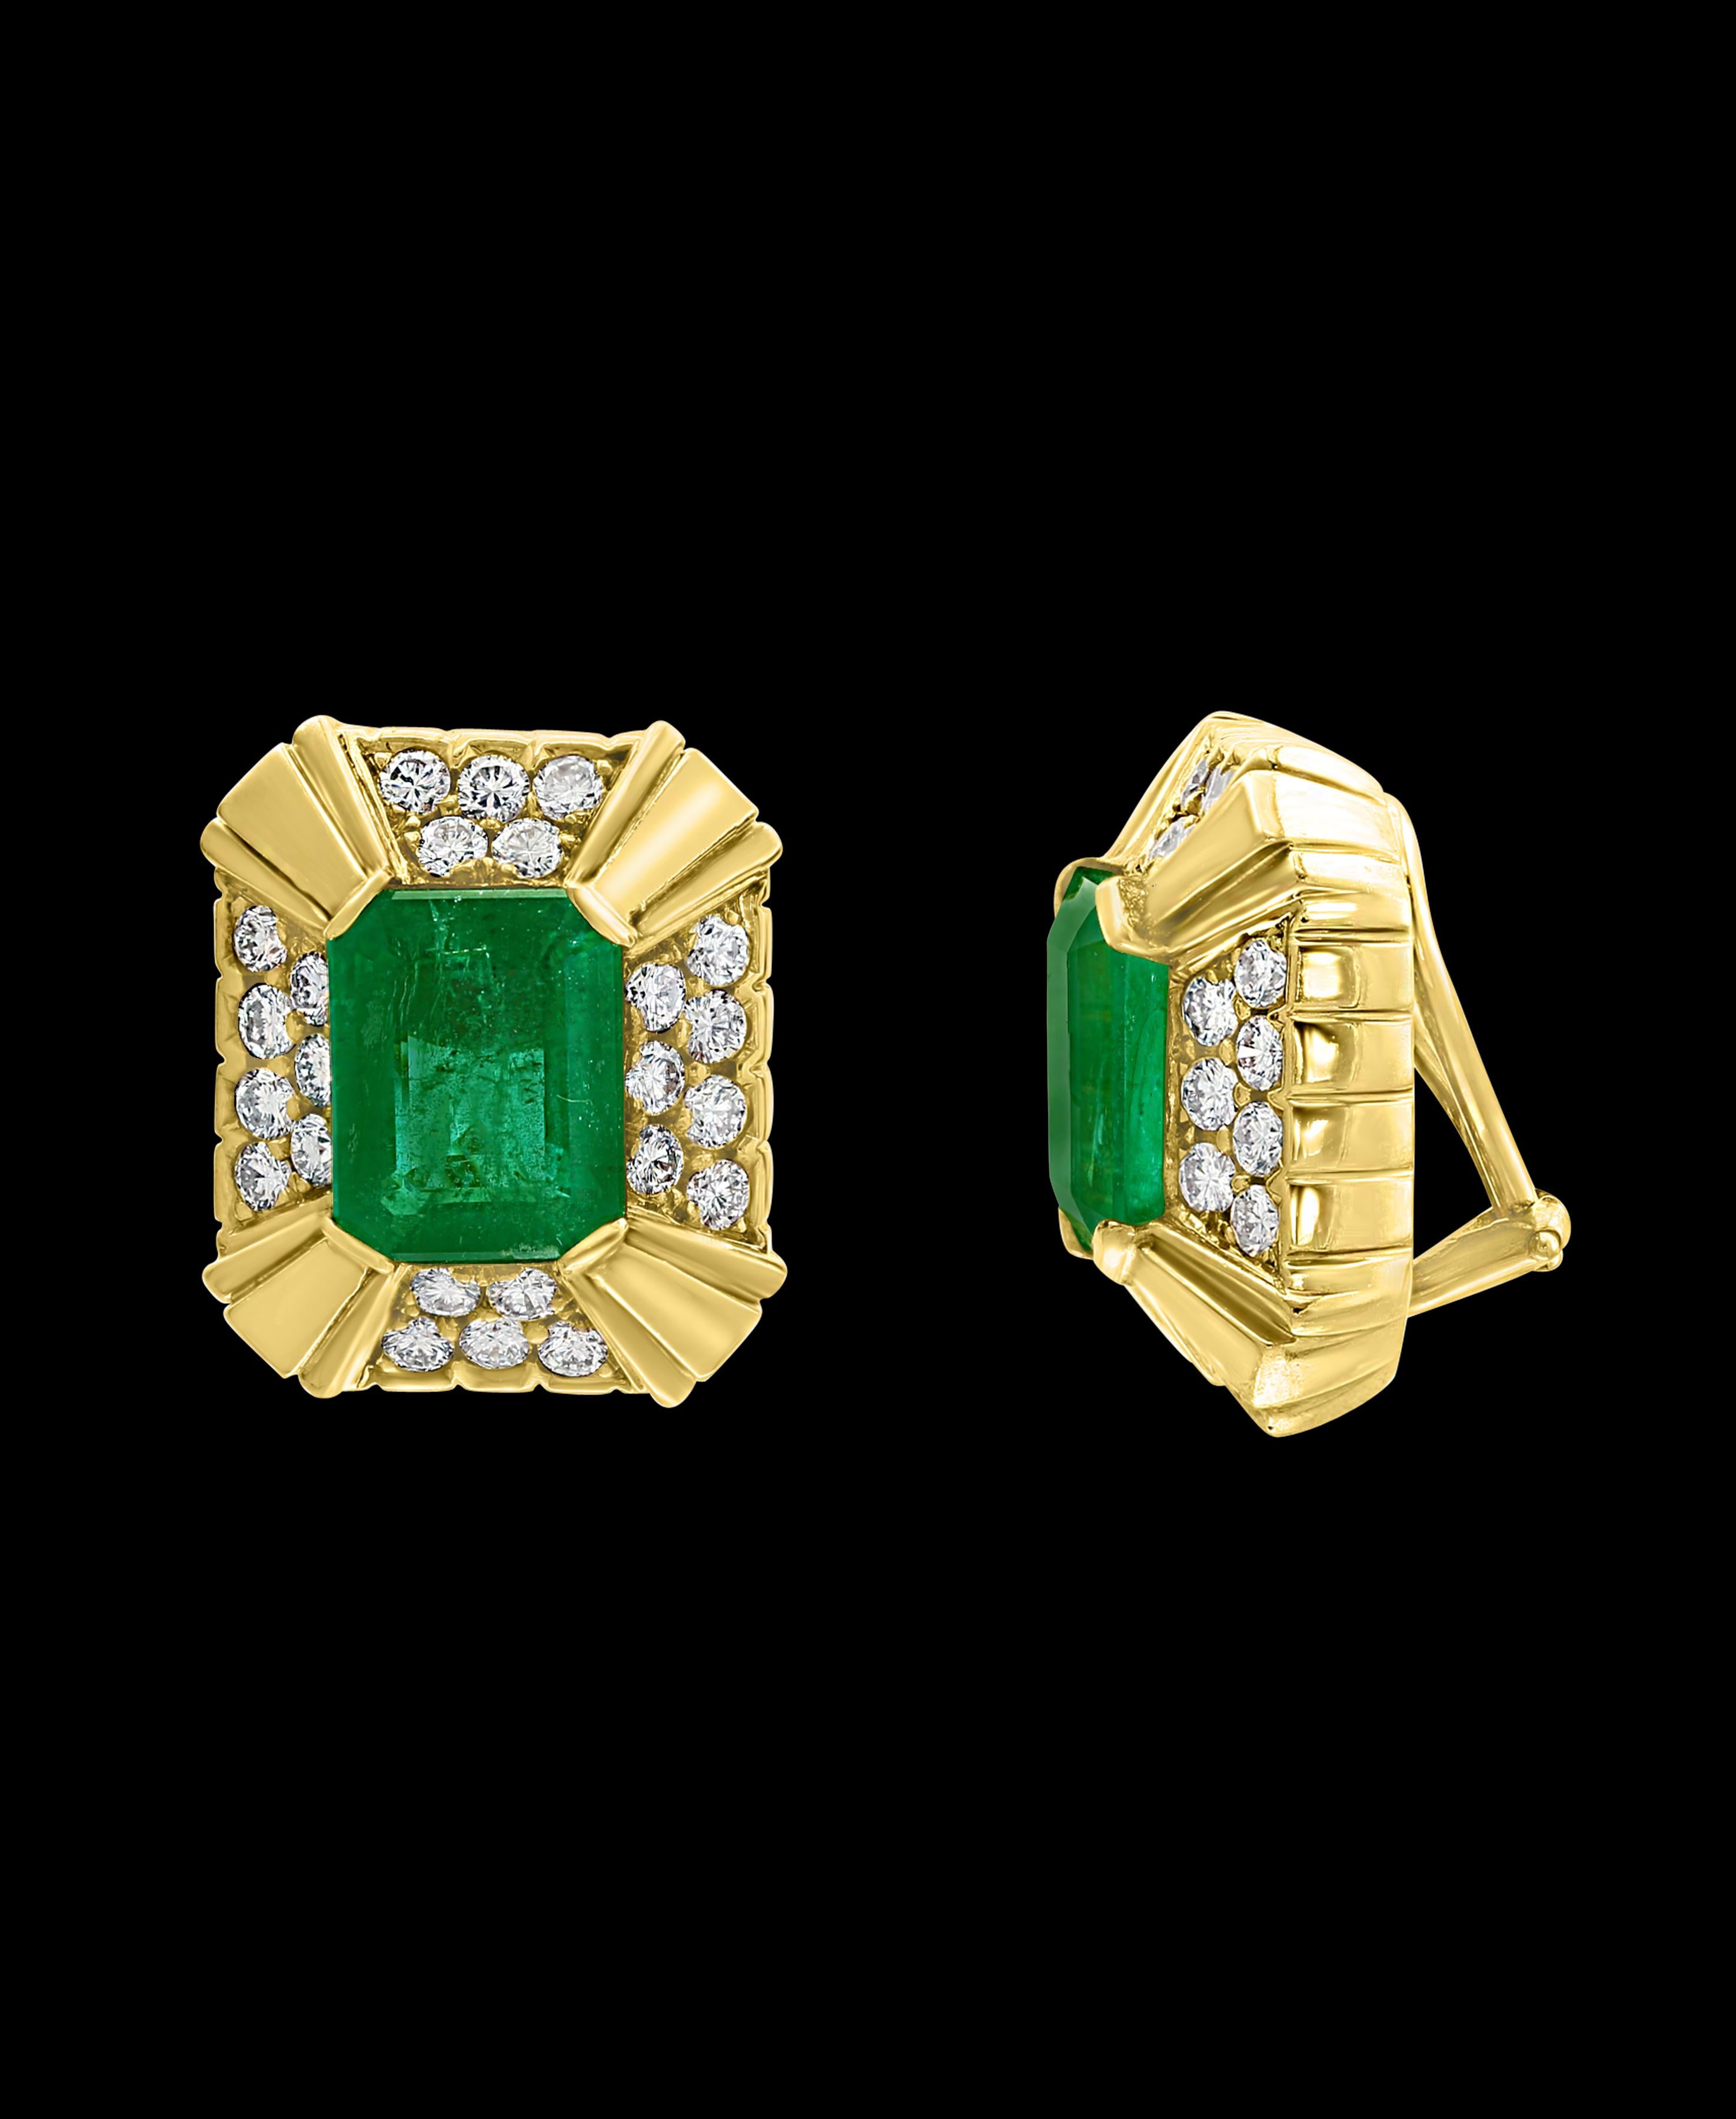 12 Carat Emerald Cut Emerald Diamond Clip Earrings 18 Karat Yellow Gold, Estate In Excellent Condition In New York, NY